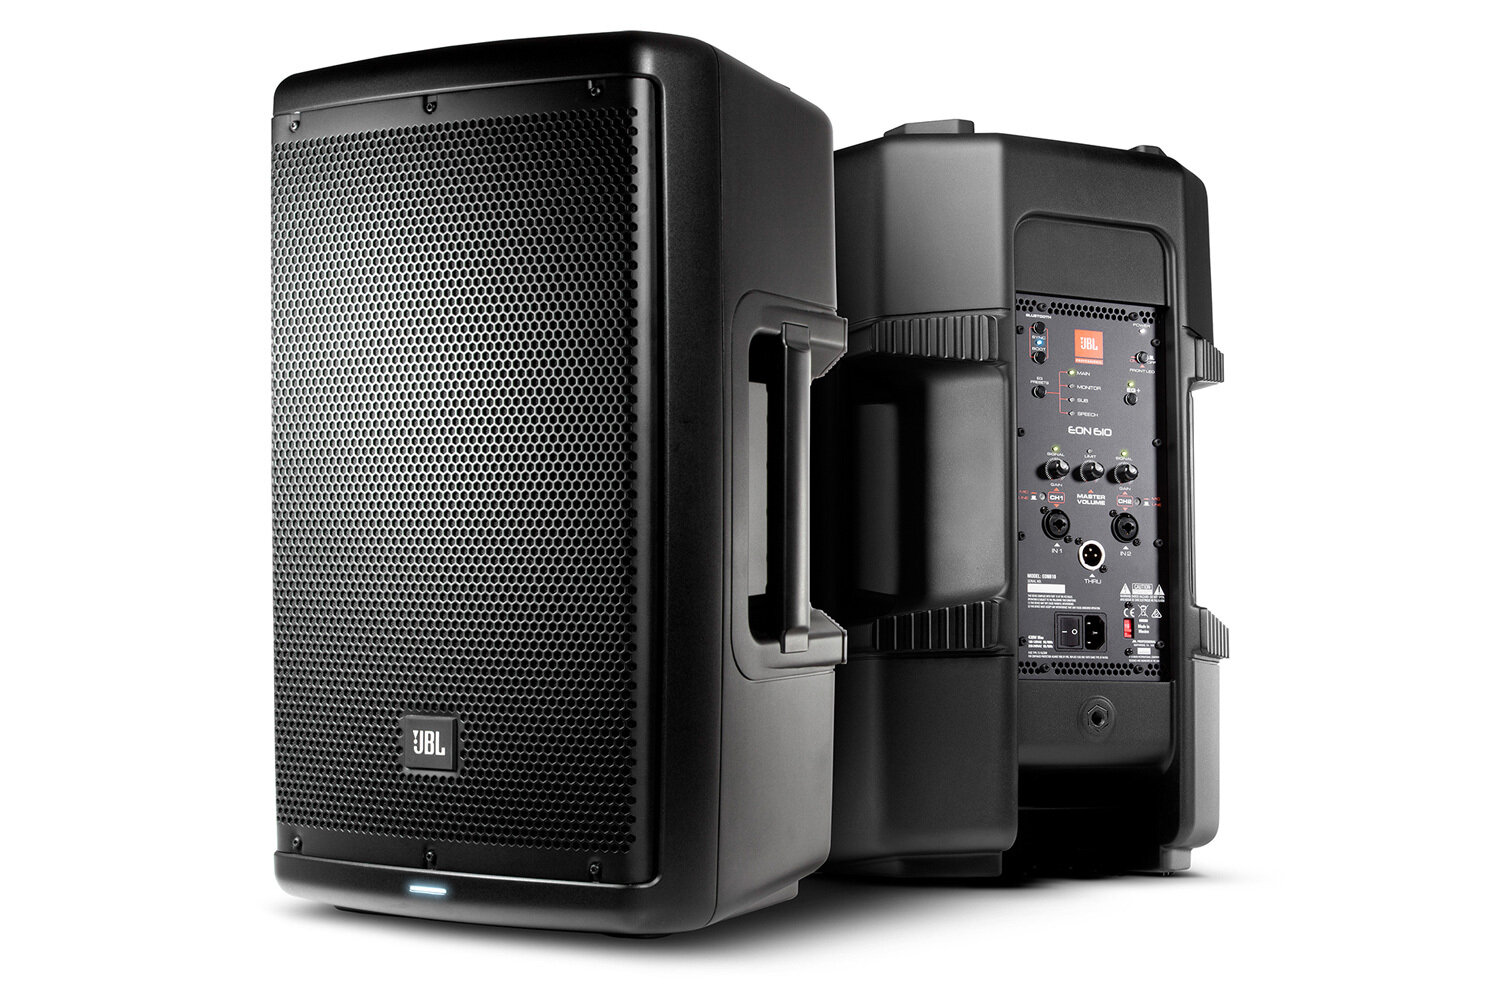 JBL EON610 Two-Way 10" 1000W Powered Portable PA Speaker with Bluetooth Control
#JBEON610 MFR #EON610